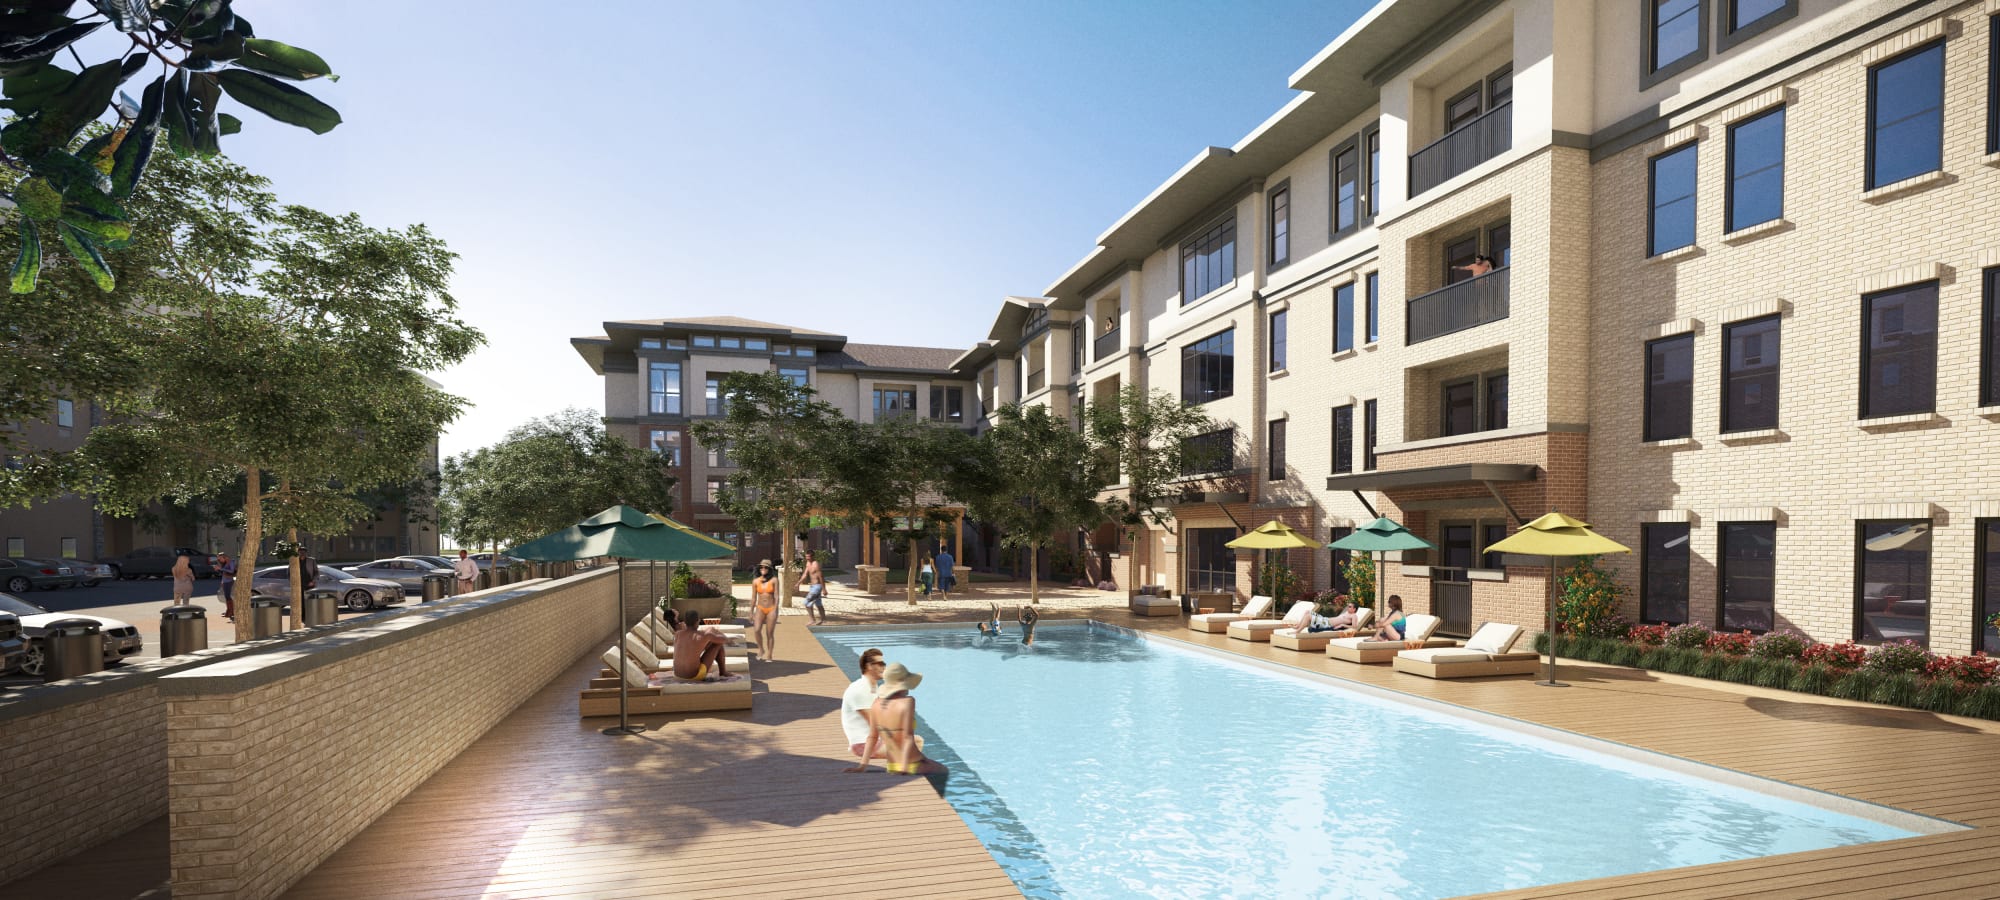 View of the pool  at The Carter apartments in Grapevine, Texas